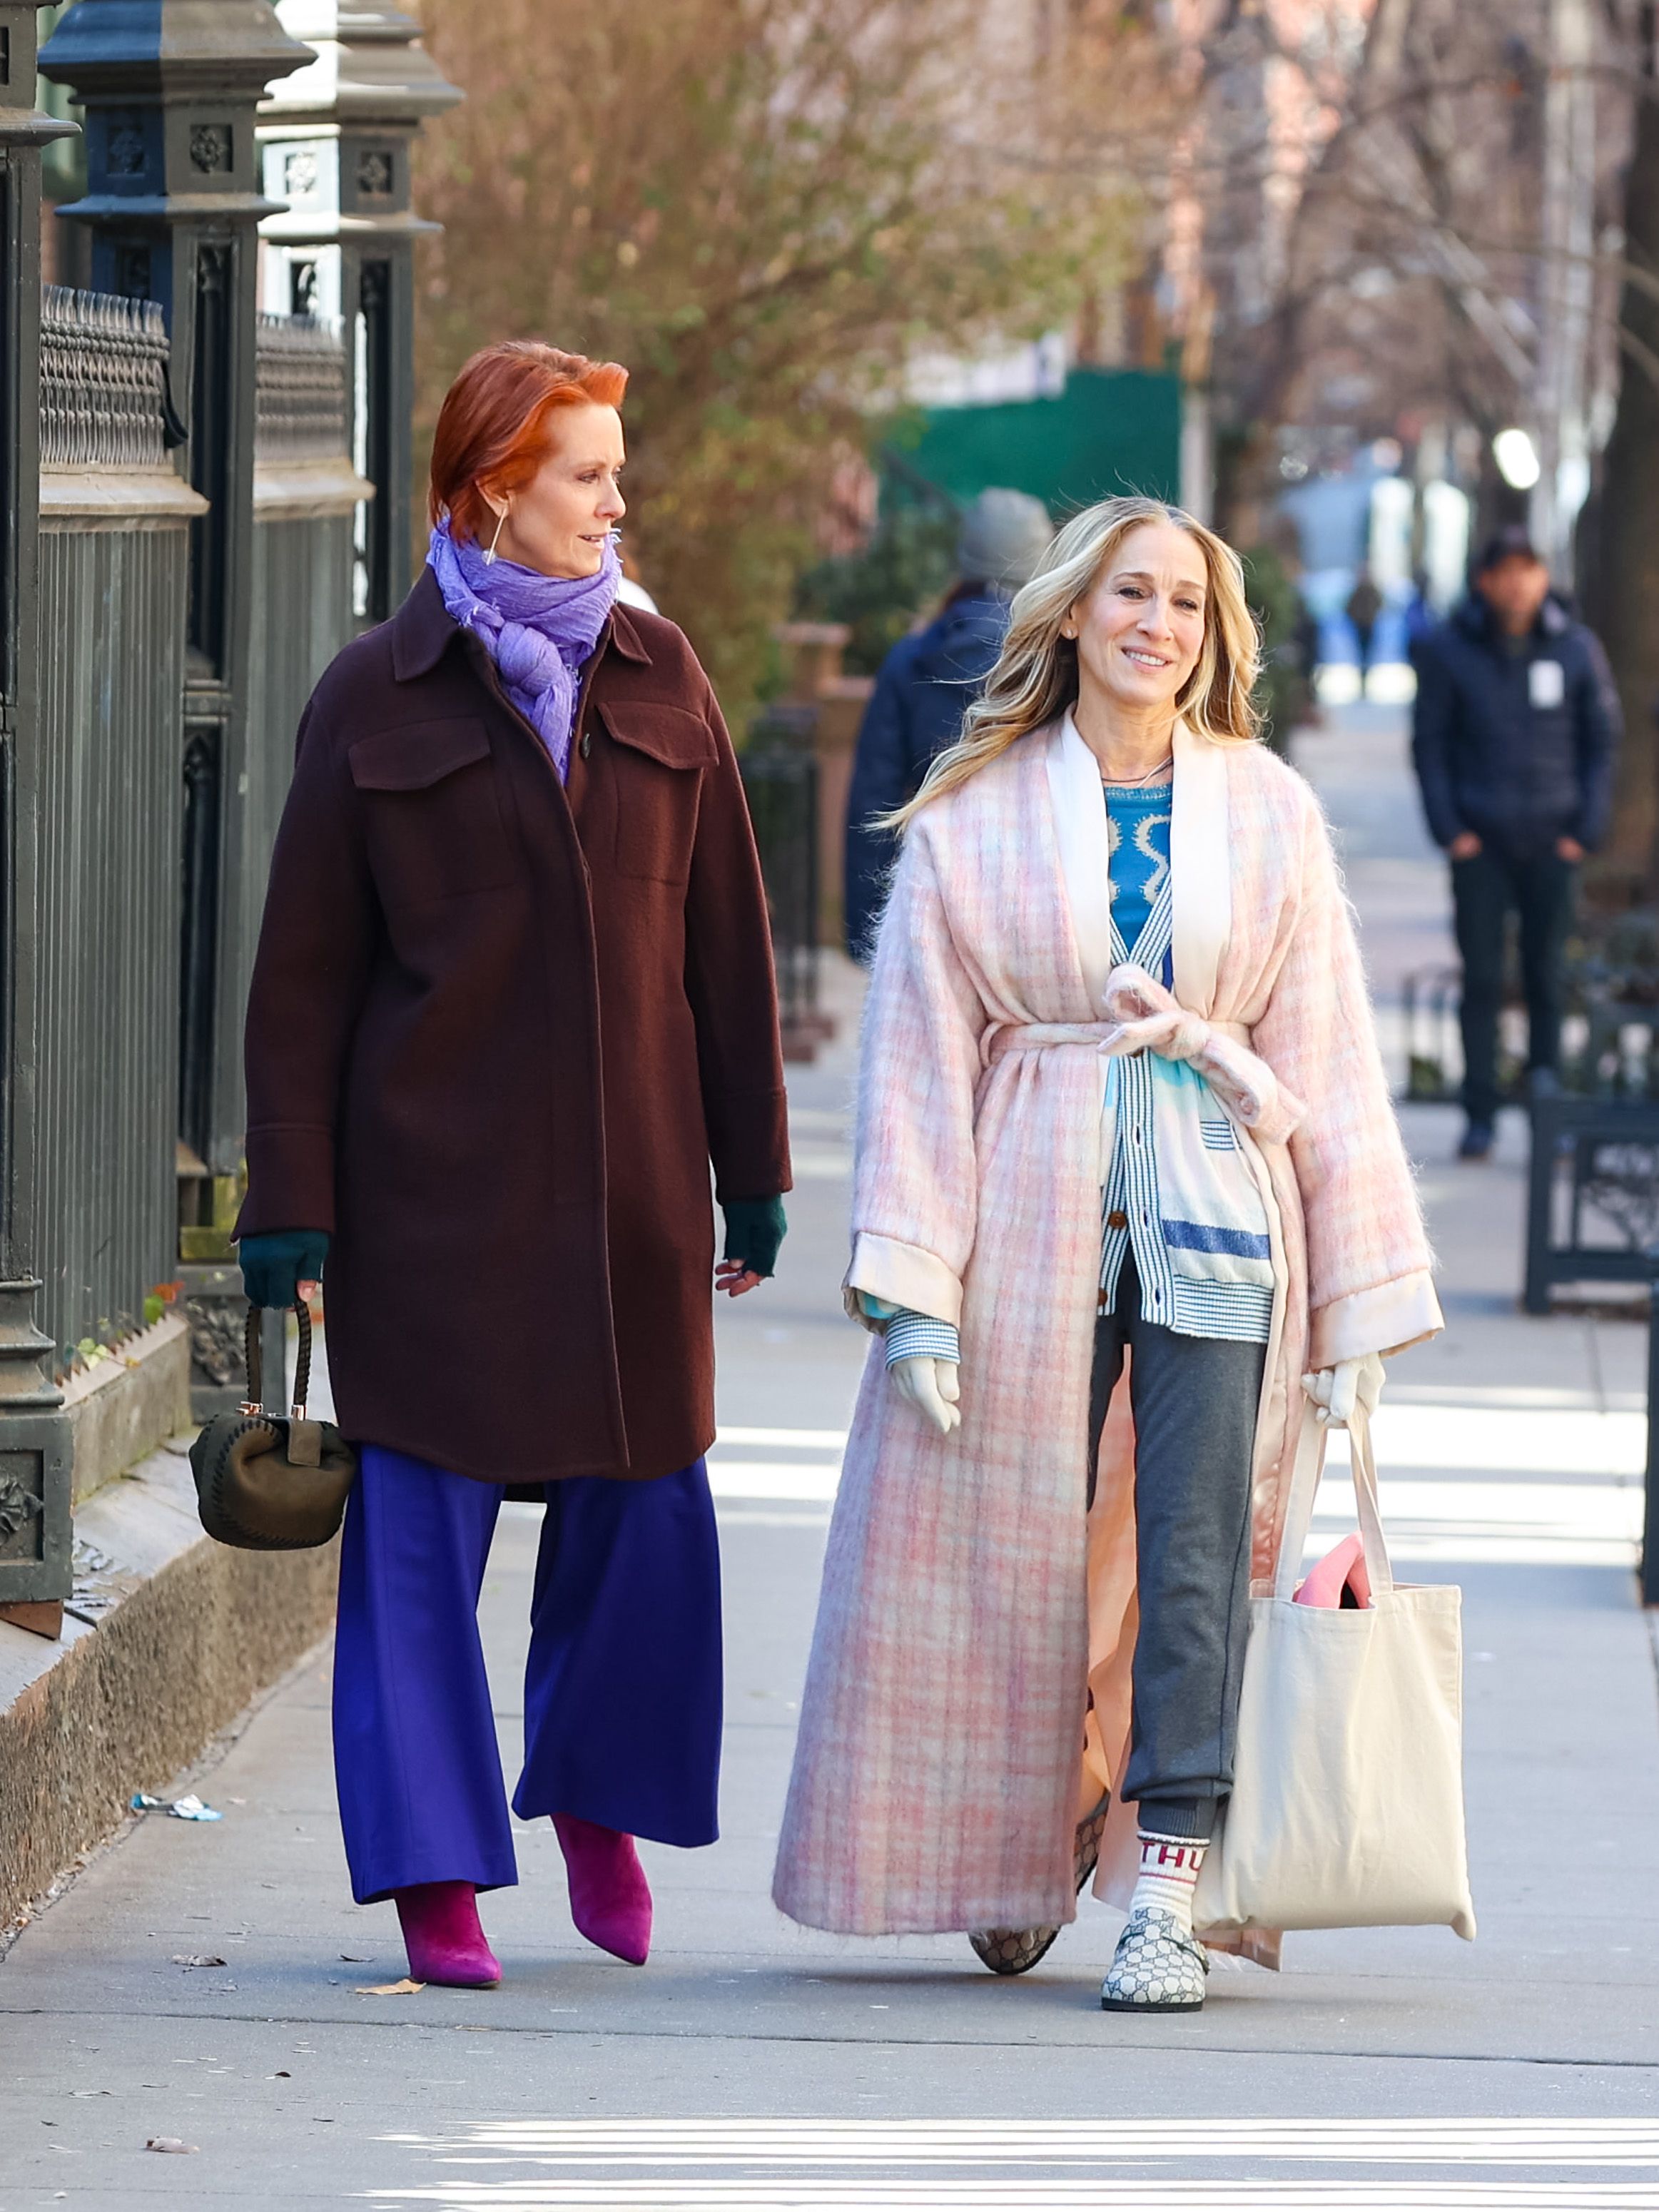 https://hips.hearstapps.com/hmg-prod/images/cynthia-nixon-and-sarah-jessica-parker-are-seen-on-the-set-news-photo-1675852189.jpg